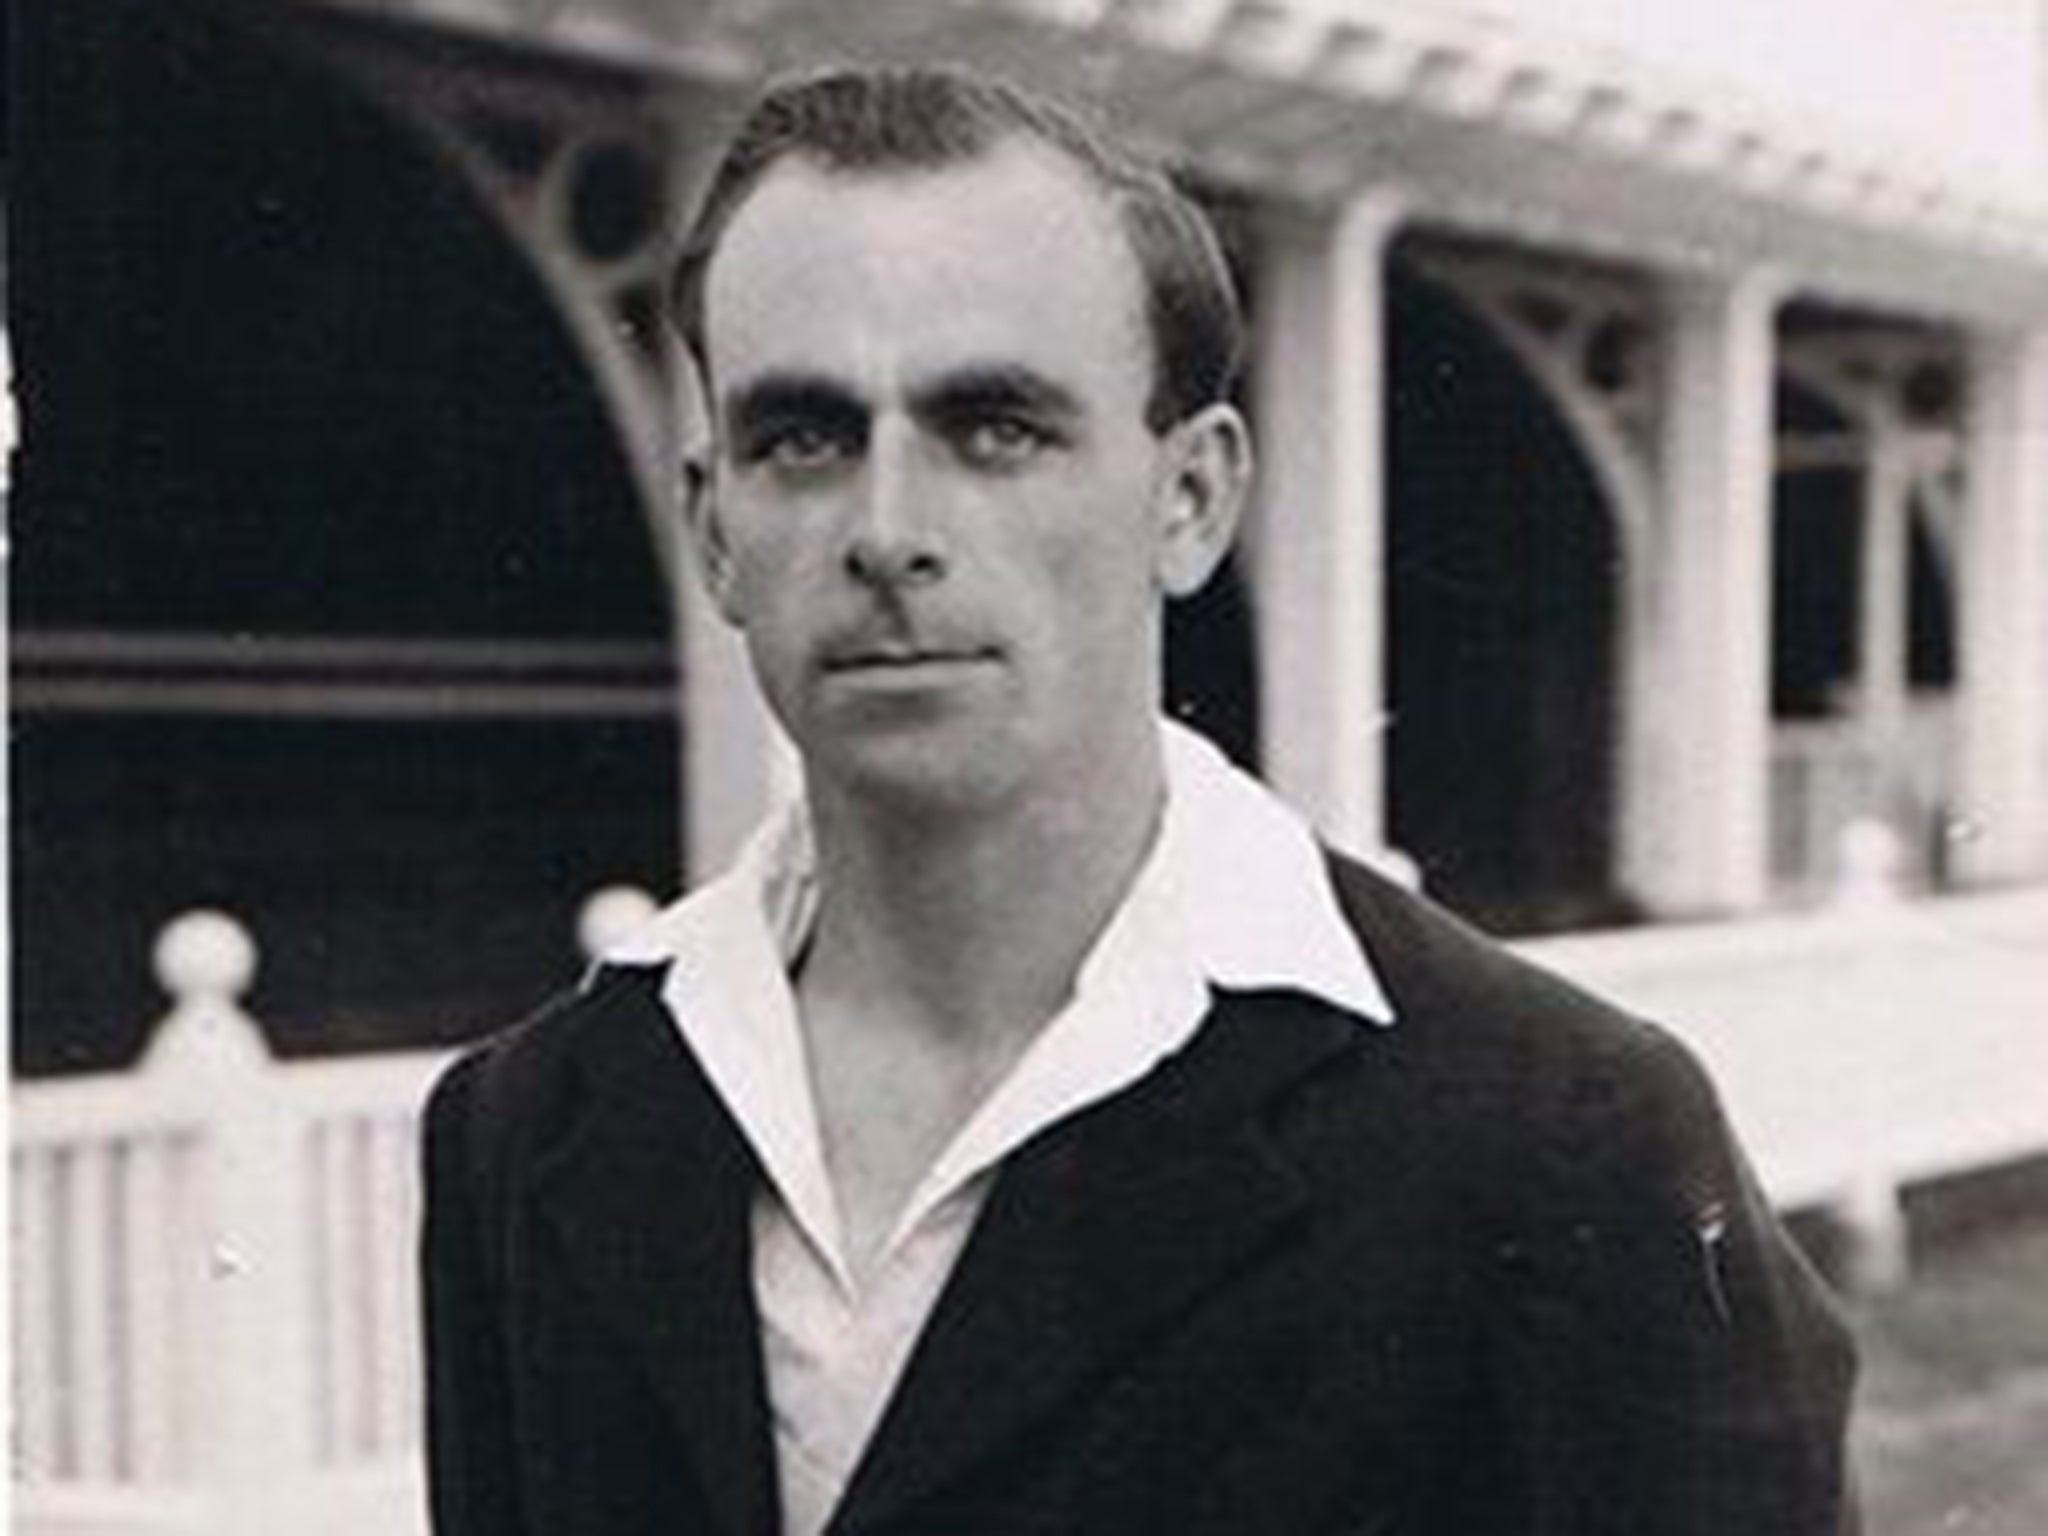 Ridgway: during his 16 seasons with Kent, he took 1,067 wickets in 341 games